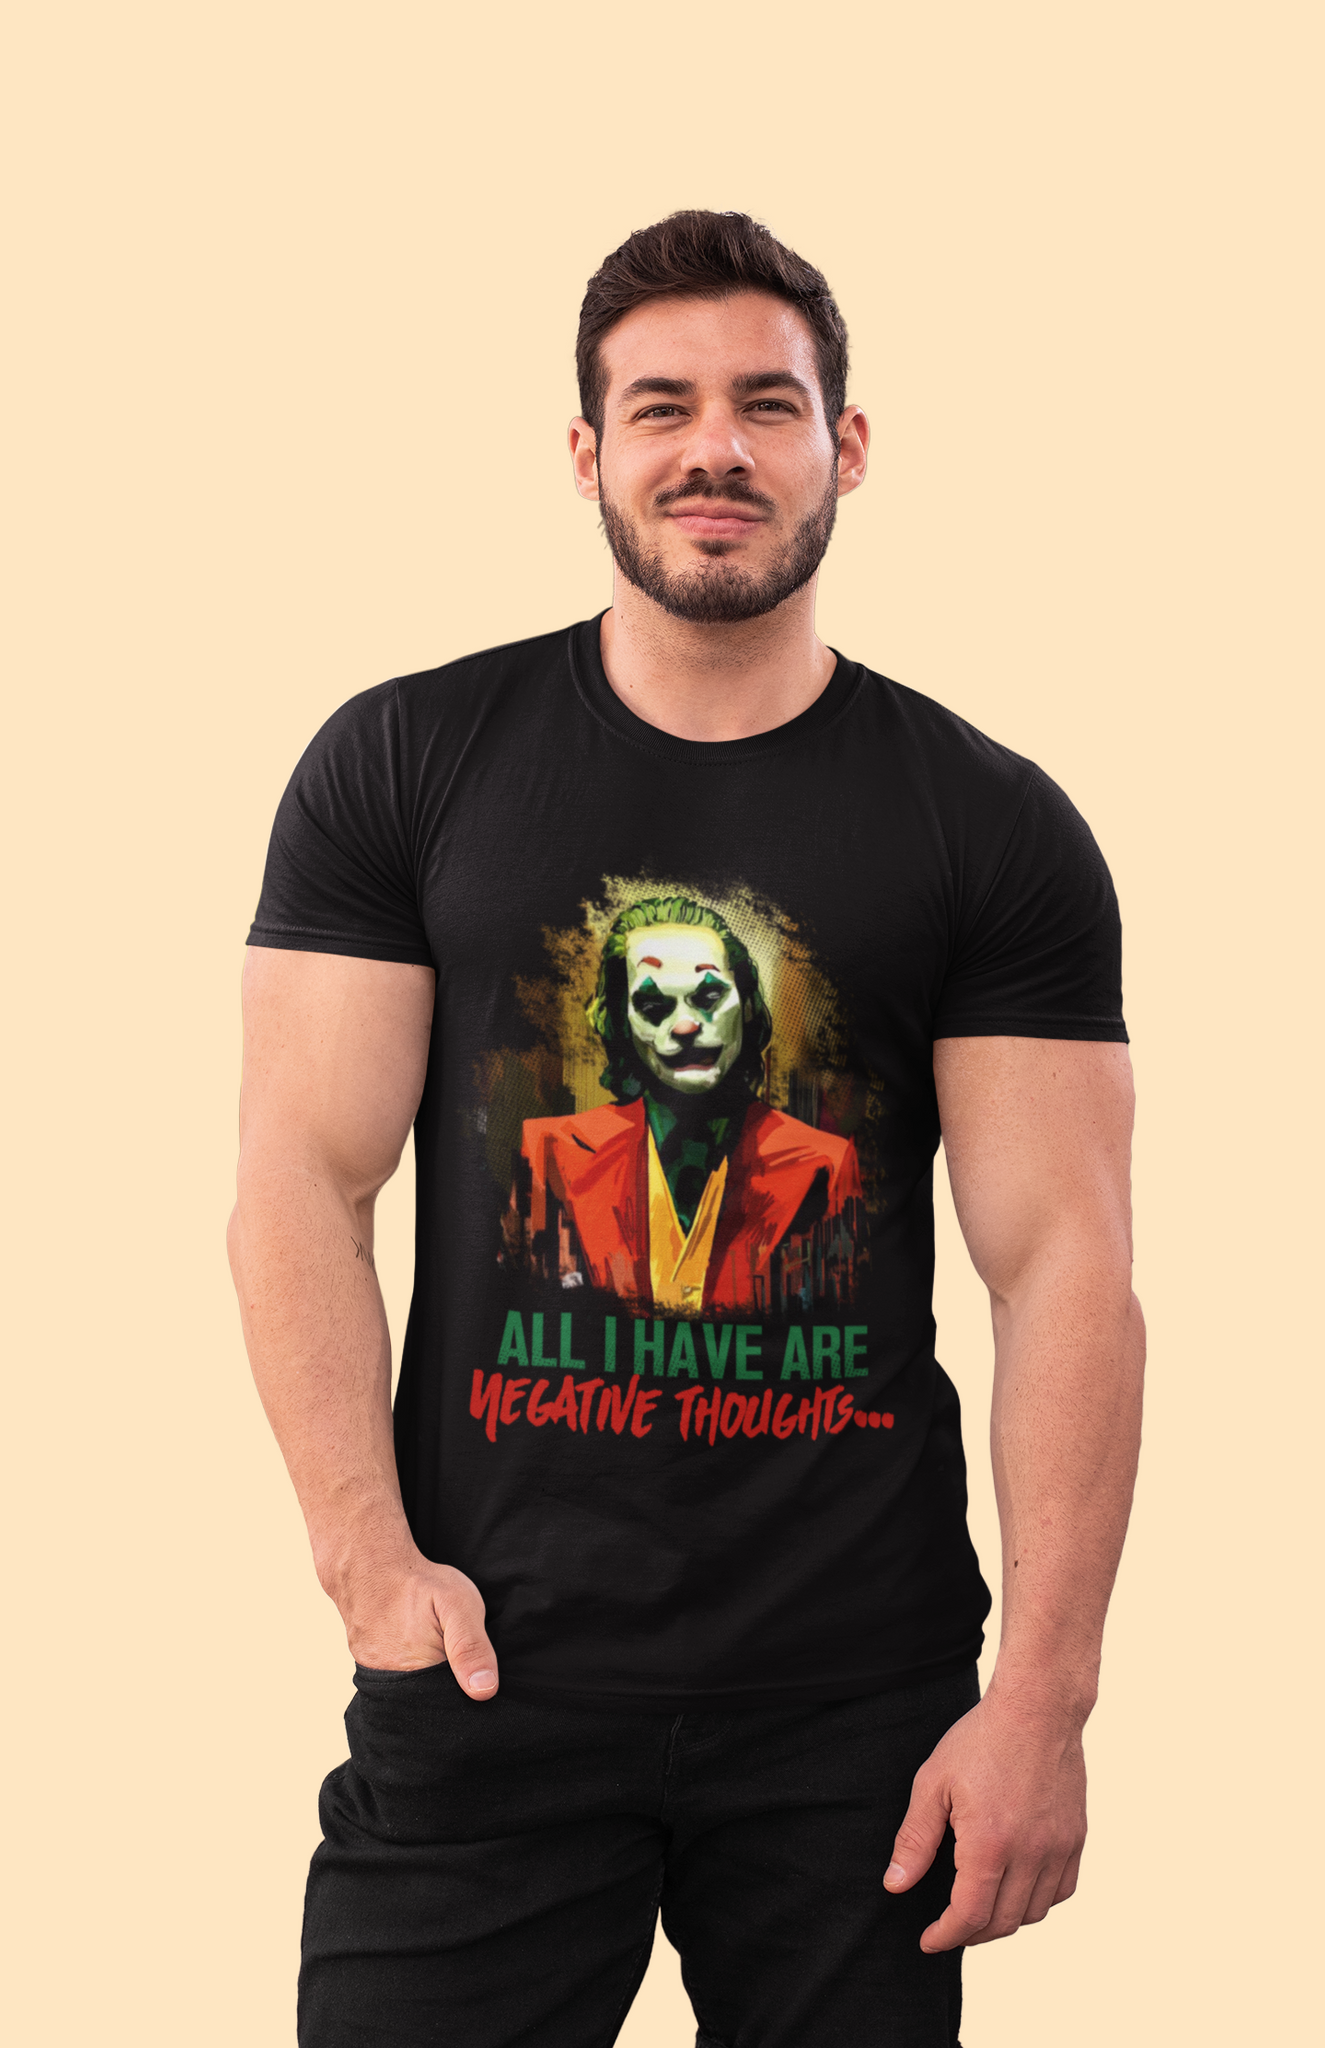 Joker T Shirt, Joker The Comedian T Shirt, All I Have Are Negative Thoughts Tshirt, Halloween Gifts